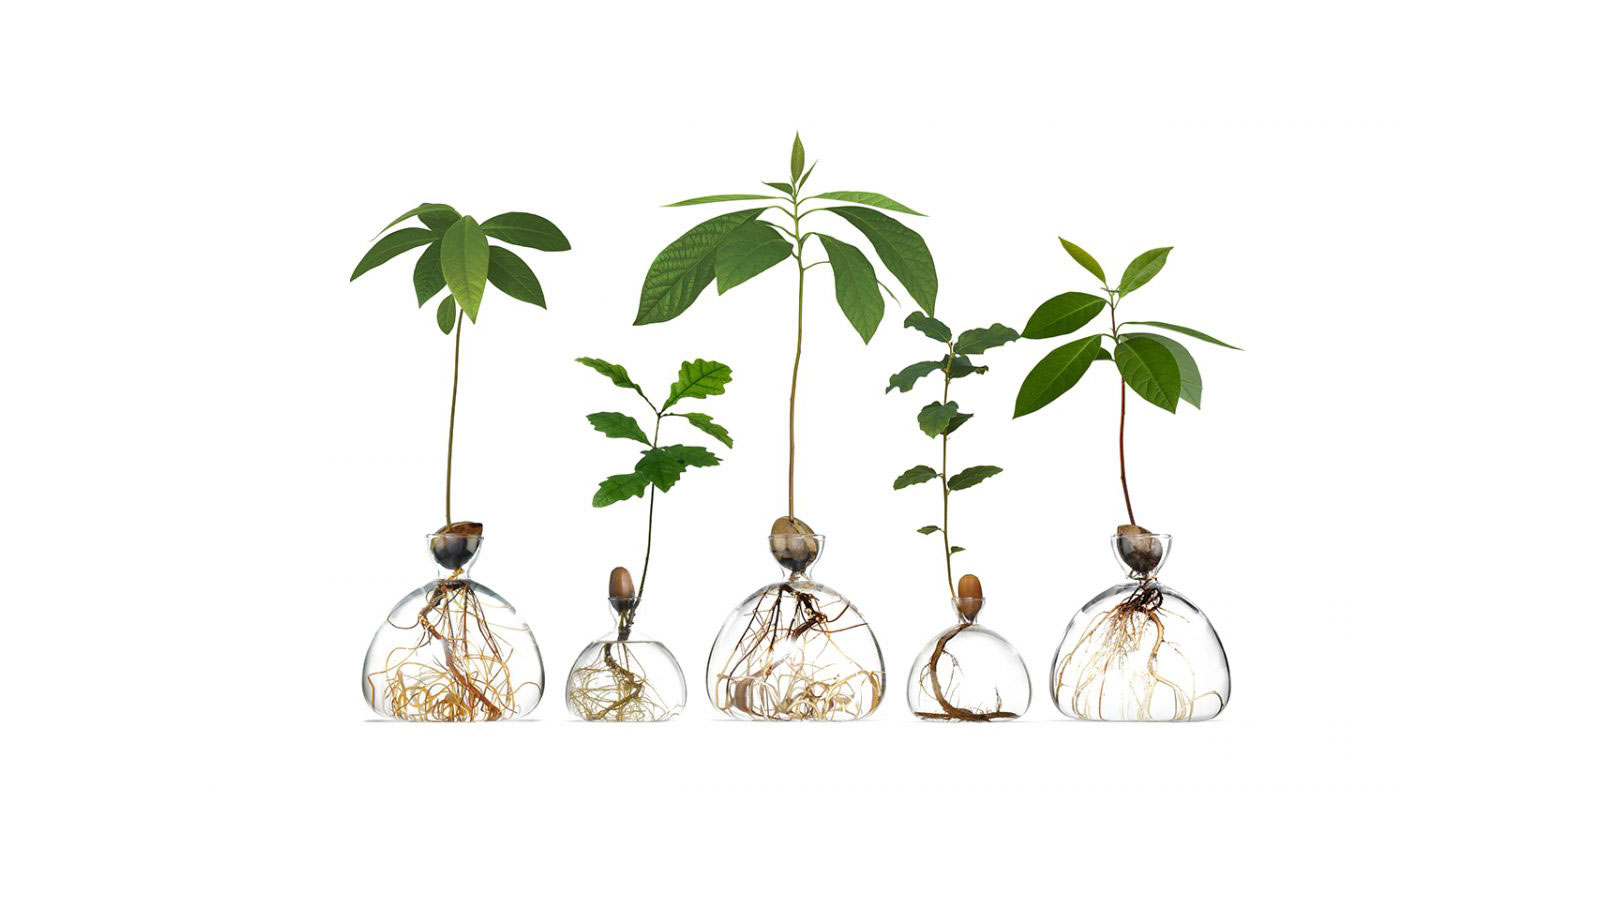 Discover Ilex vases and the life of trees below the surface